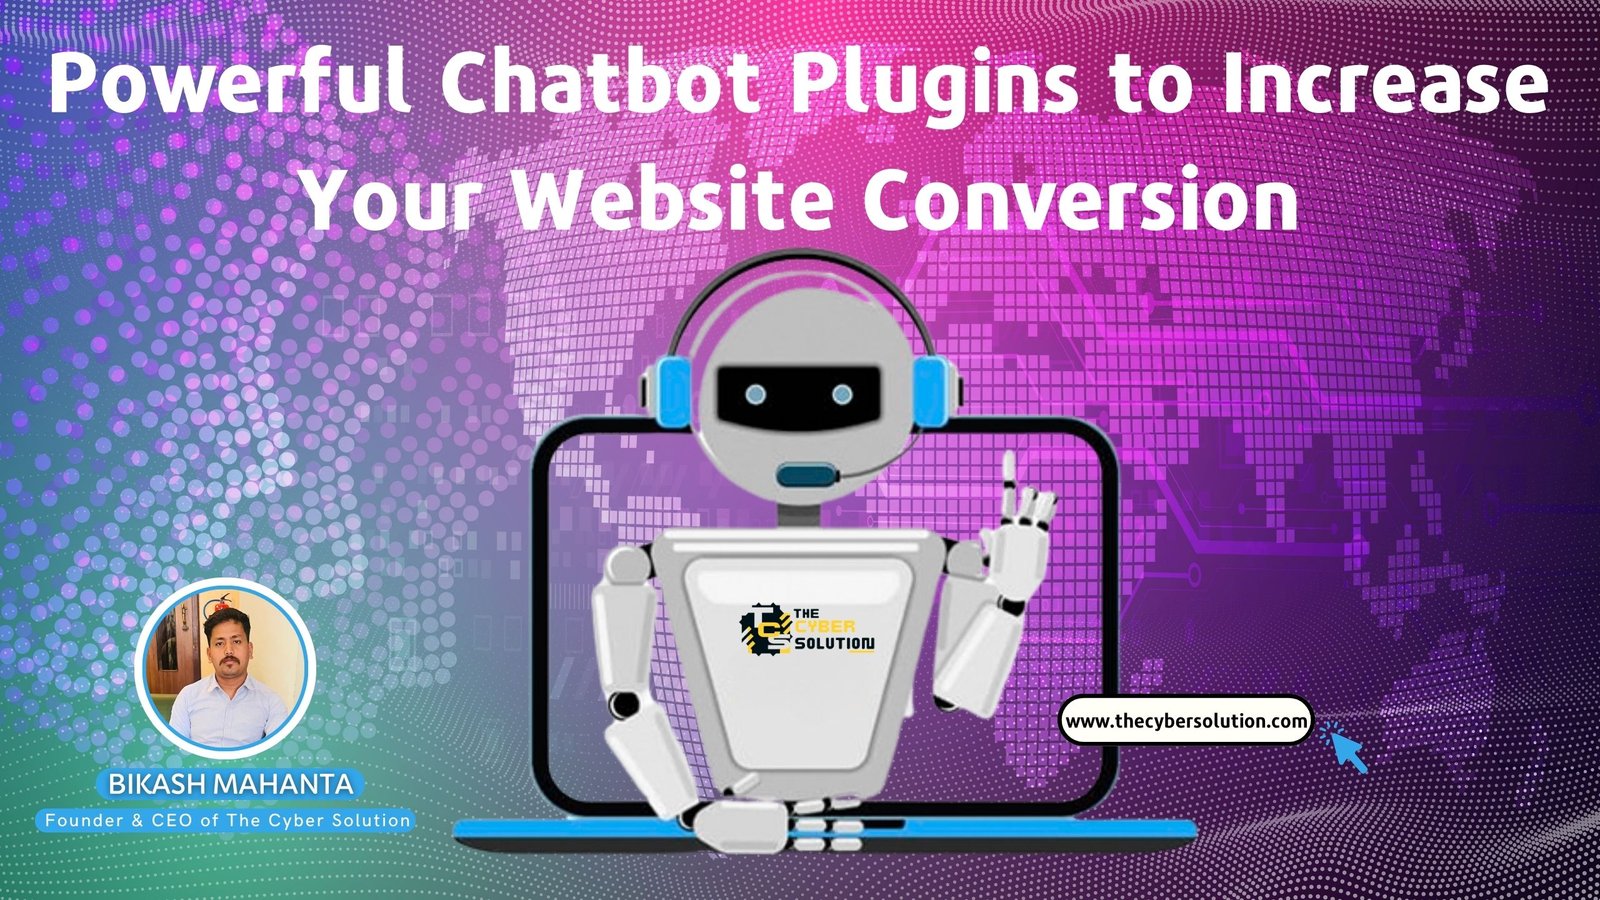 Powerful Chatbot Plugins to Increase Your Website Conversion